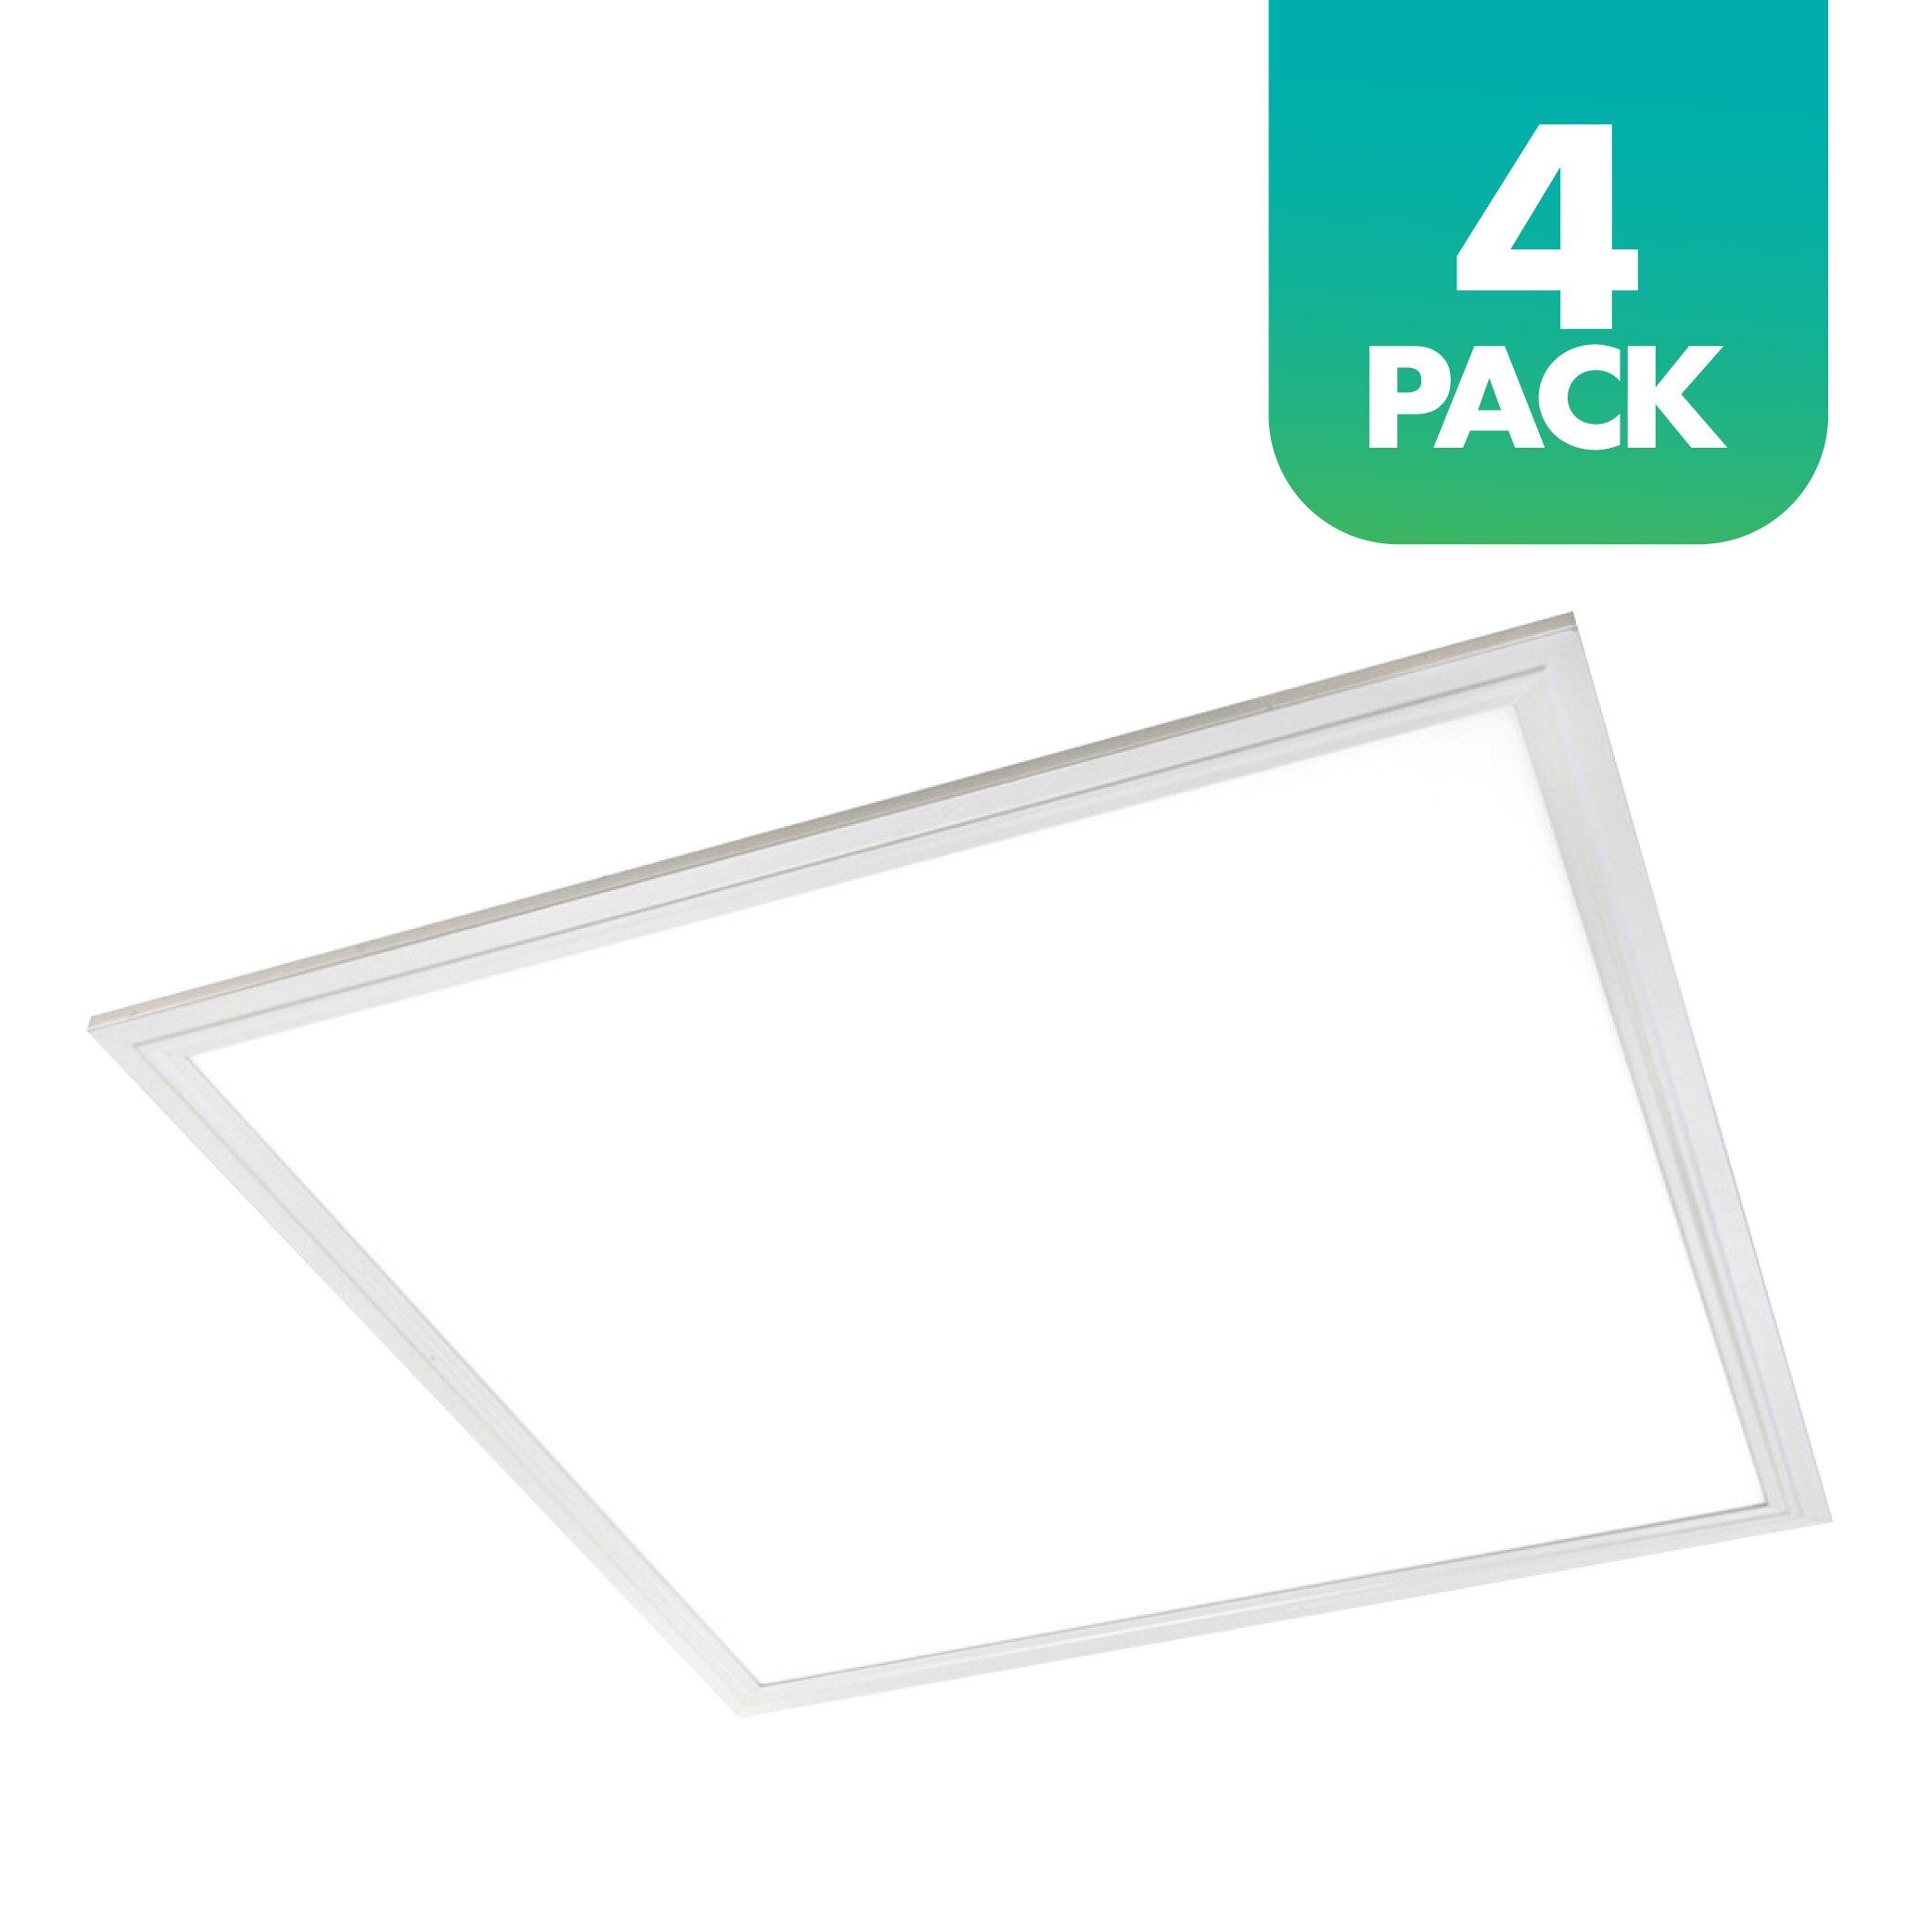 Simply Conserve 4-Pack 2-ft x 2-ft Adjustable Lumens White LED Panel Light in LED Panel Lights department at